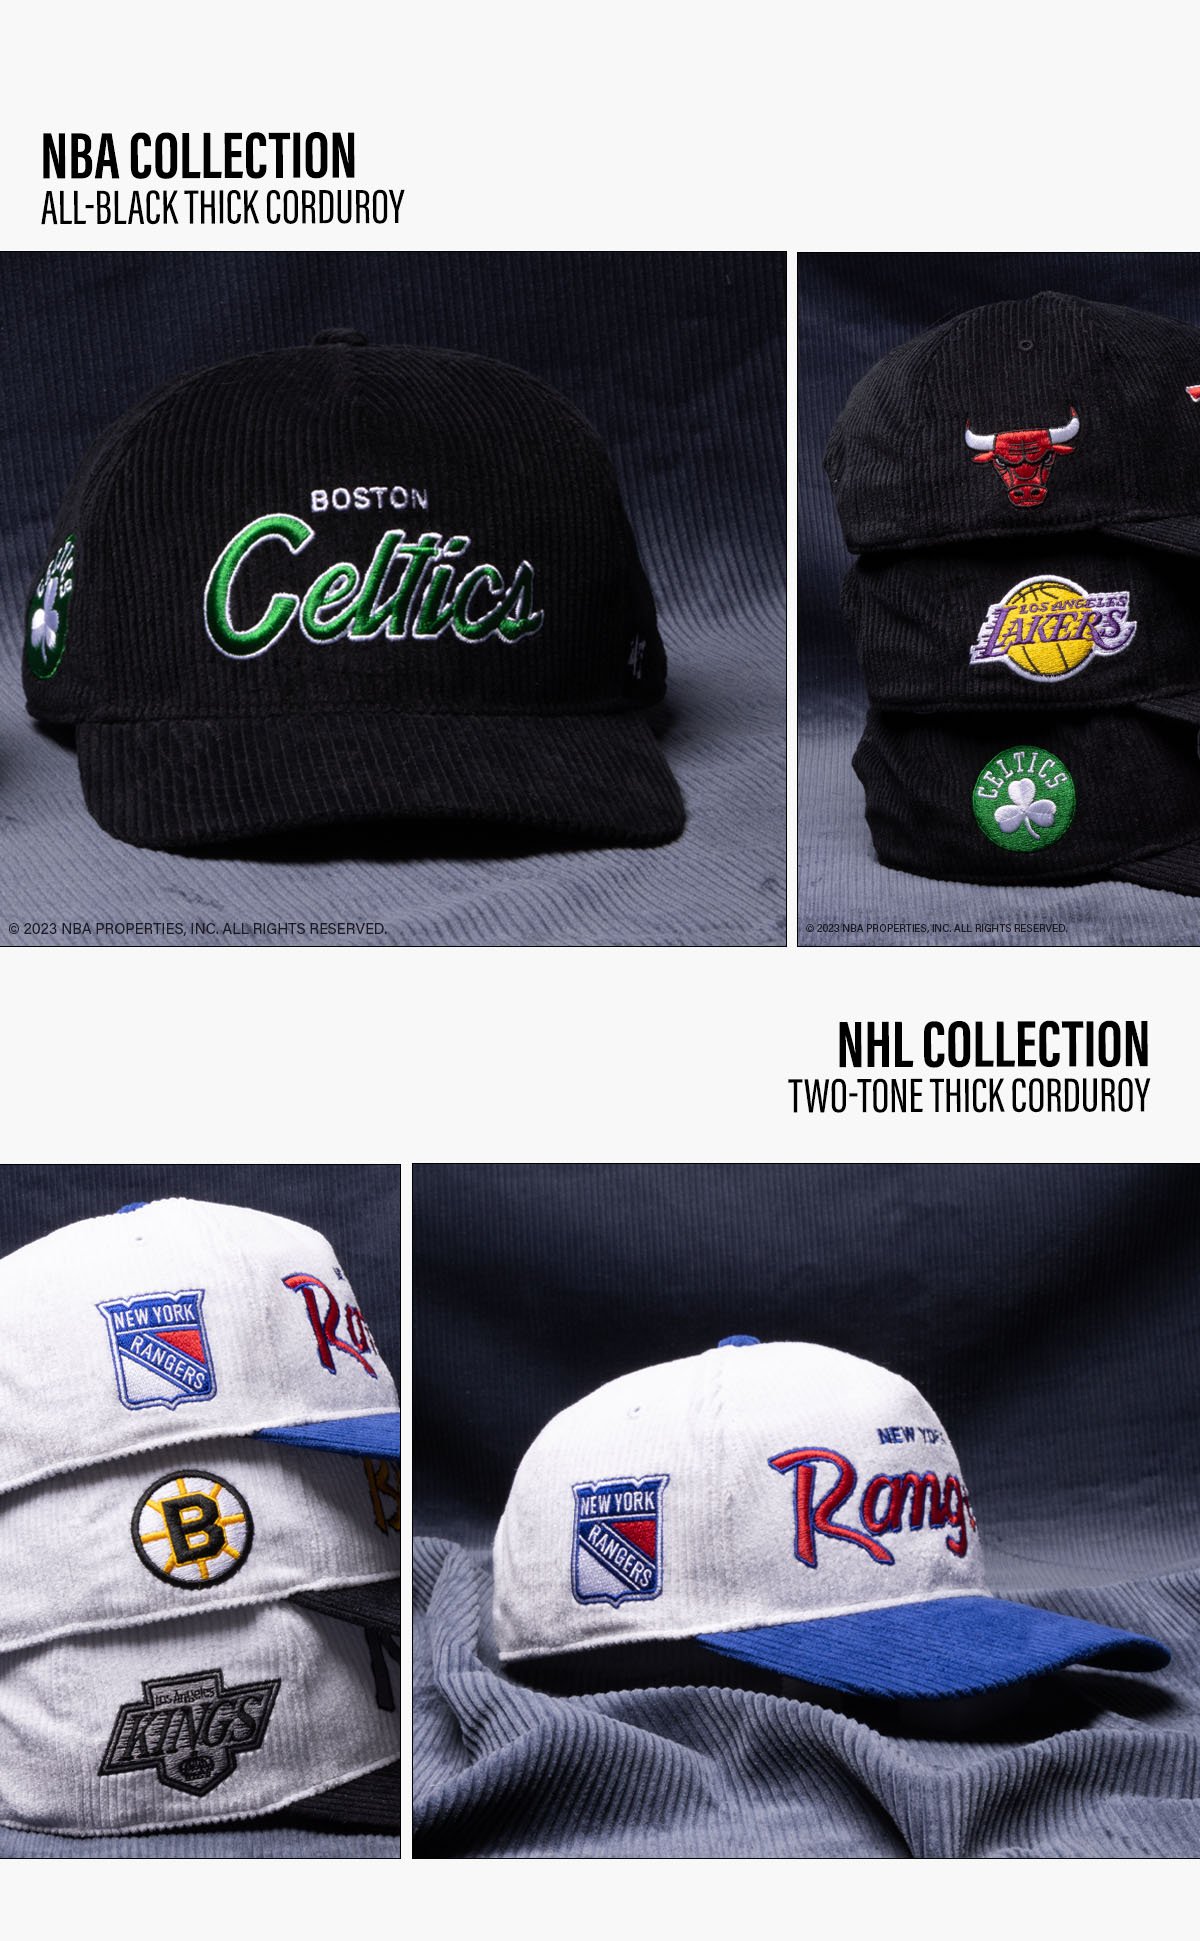 47 on X: Introducing two new NBA & NHL styles. The Crosstown